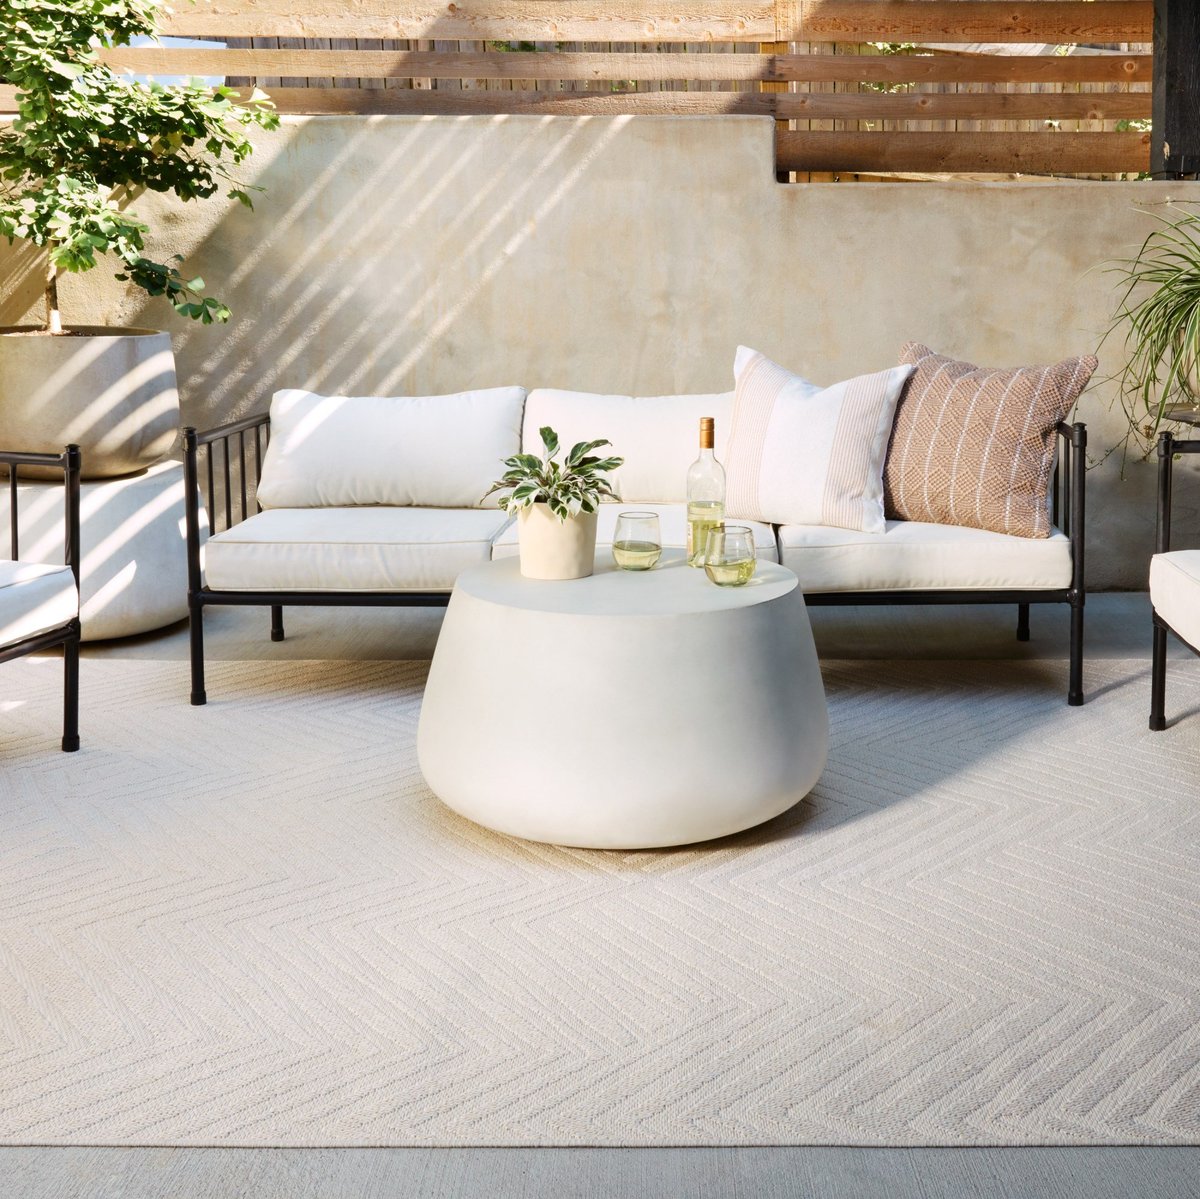 Outdoor Rugs - Outdoor Rug Sizing Guide